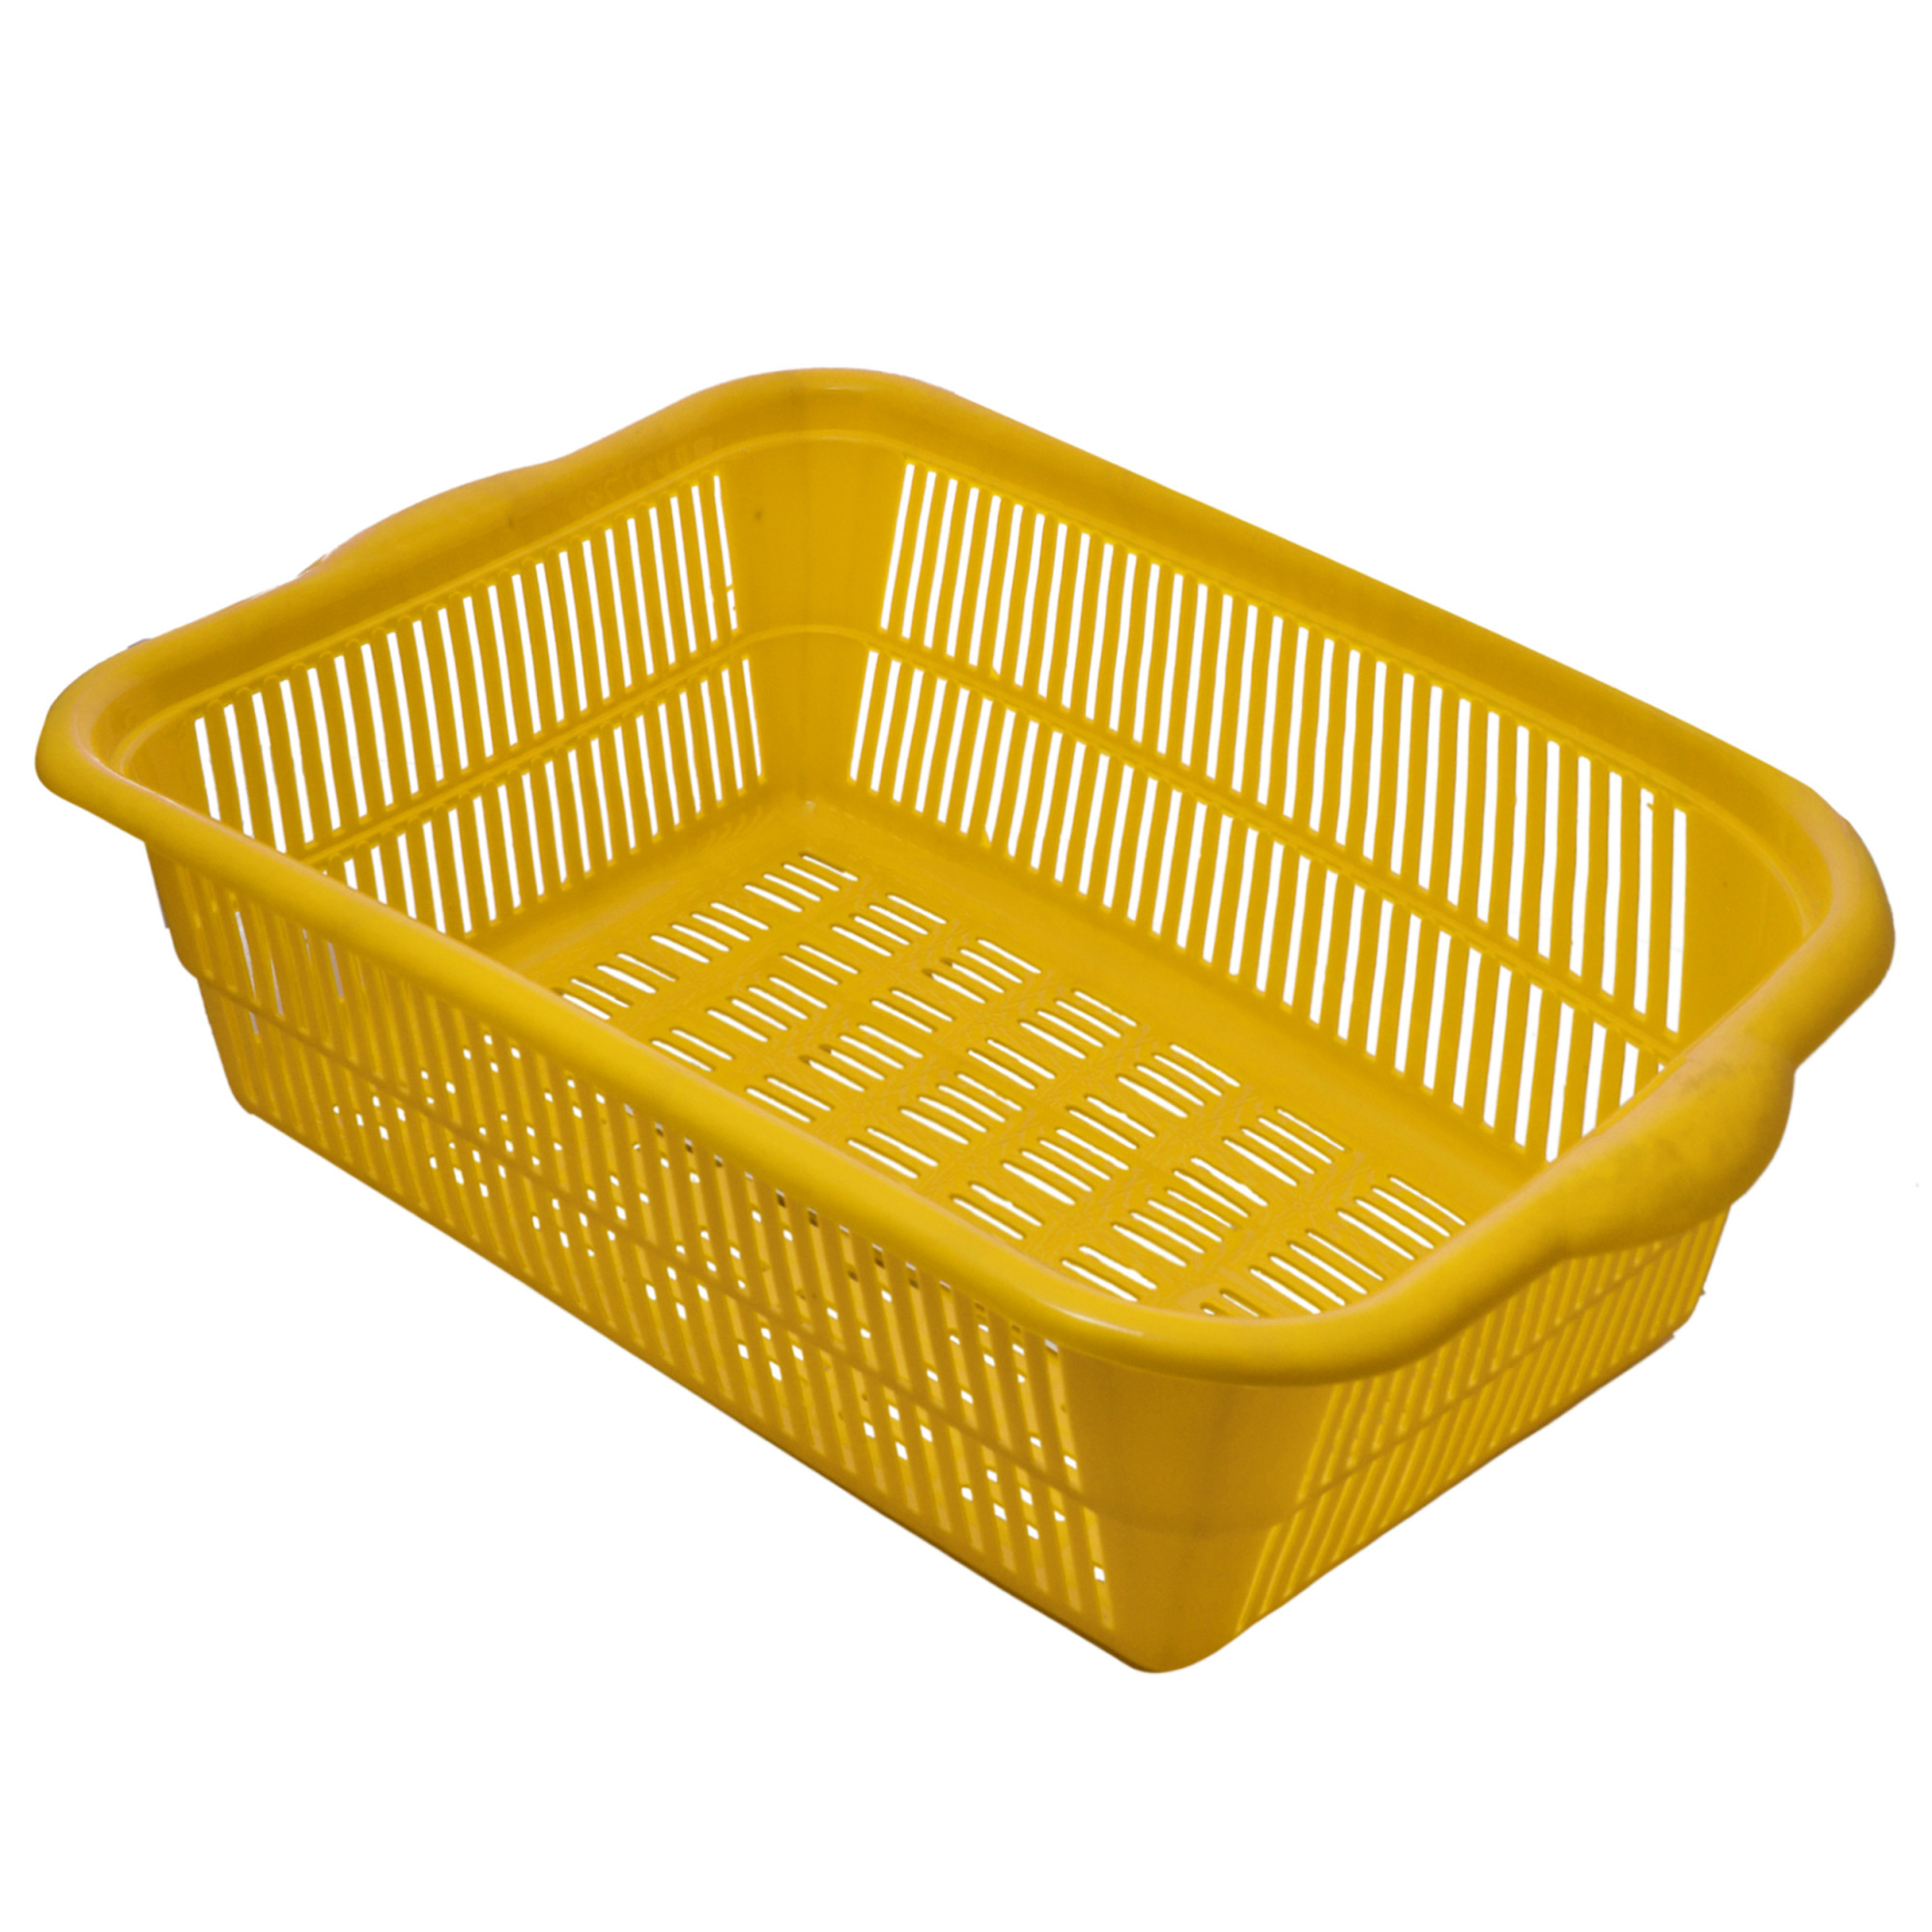 Kuber Industries 3 Pieces Plastic Kitchen Dish Rack Drainer Vegetables And Fruits Basket Dish Rack Multipurpose Organizers ,Small Size,Yellow